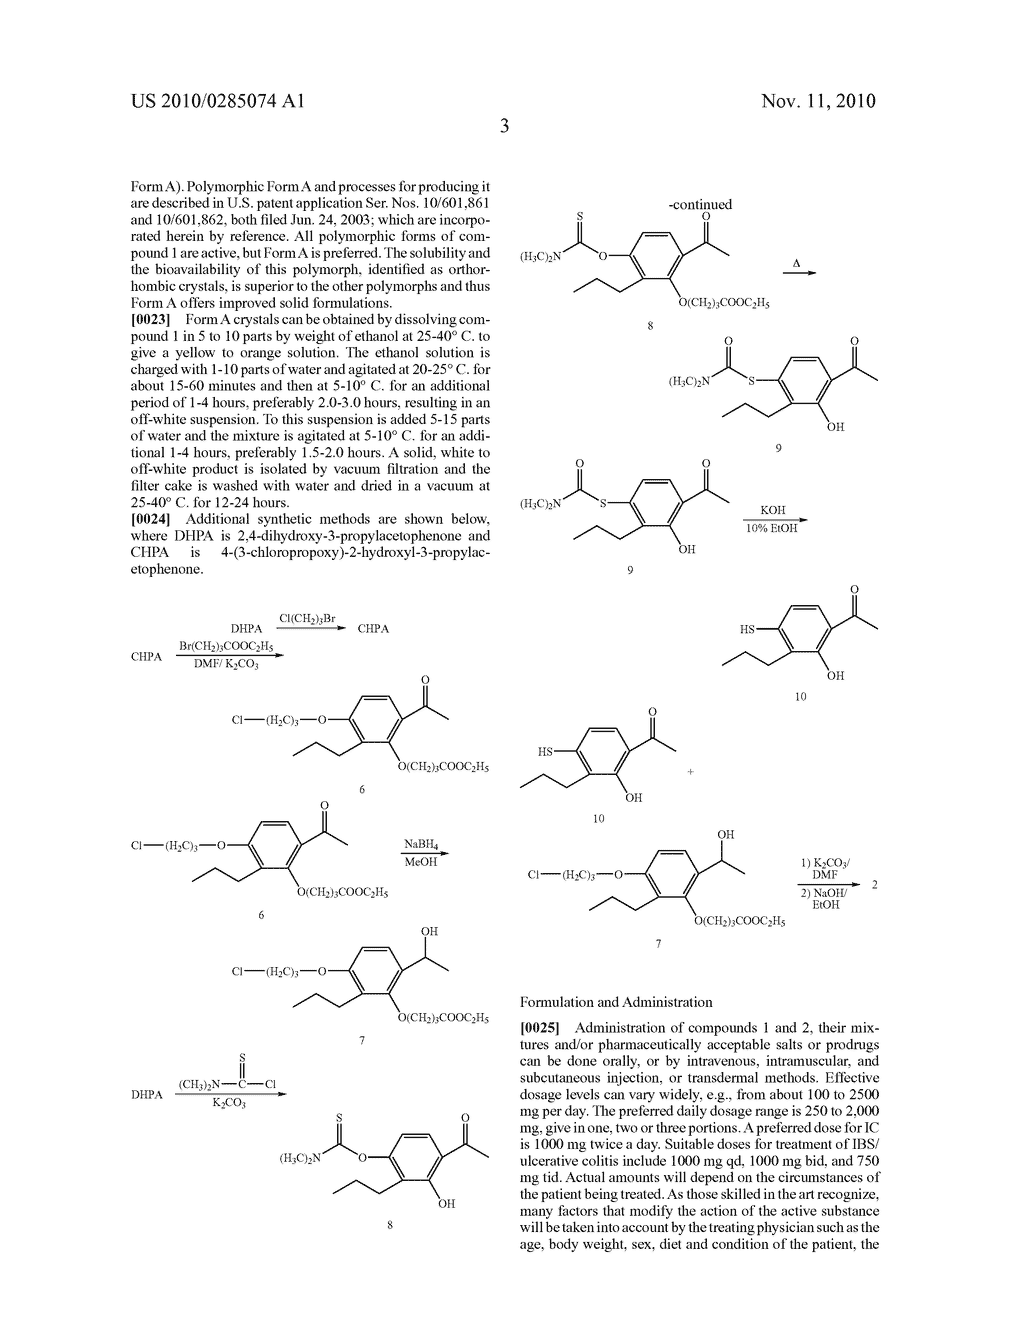 PHENOXYALKYLCARBOXYLIC ACID DERIVATIVES IN THE TREATMENT OF IRRITABLE BOWEL SYNDROME - diagram, schematic, and image 11